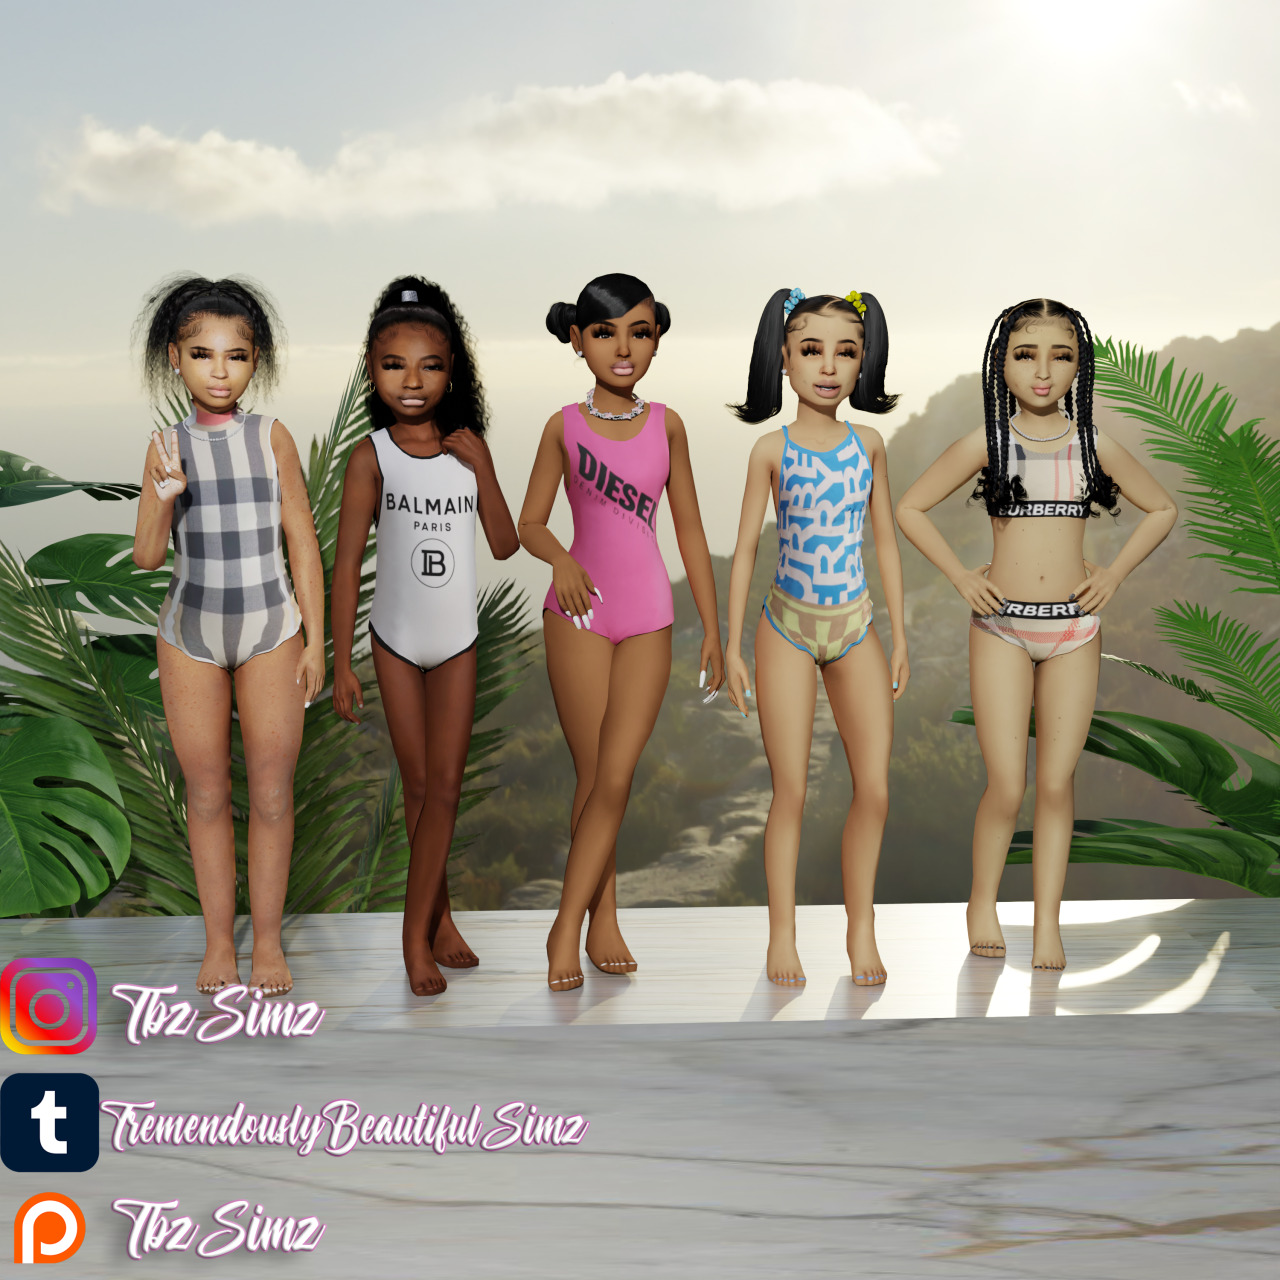 Desginer SwimsuitsChild Designer Swimsuits• New Mesh
• Full Body
• All LOD’s
Includes:
• Burberry 3 Versions(V1:4 Swatches, V2&3: 1 Swatch)
• Fendi(2 Swatches)(Located In Balmain Swinsuit)
• Balmain(1 Swatch)
• Various Designers(14 Swatches)
Look 4...